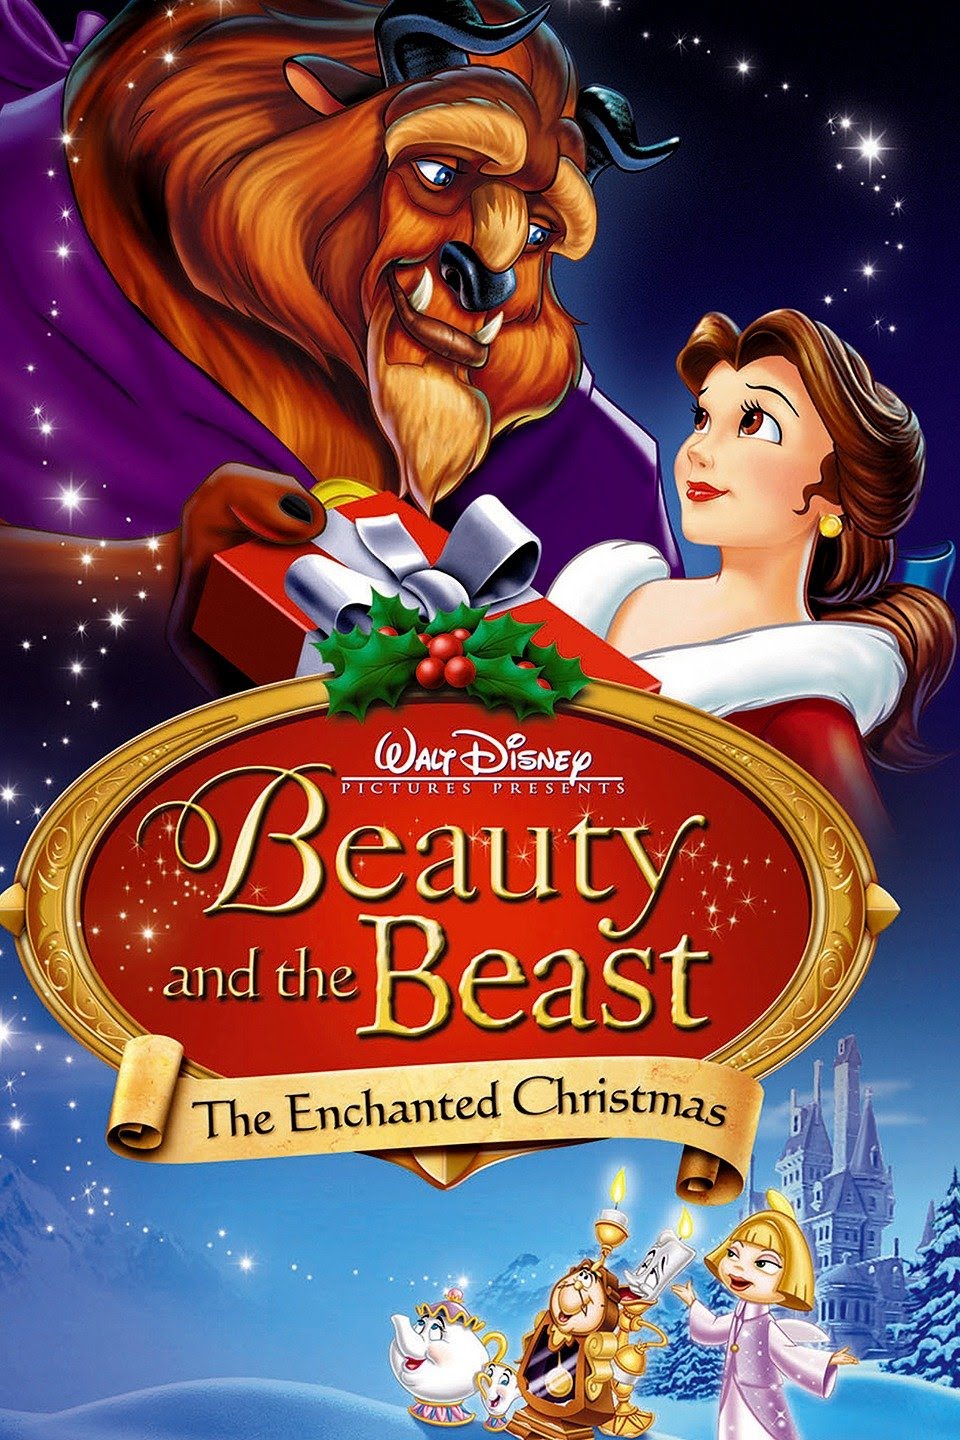 Beauty and the Beast: Enchanted Christmas (1997) Vudu or Movies Anywhere HD redemption only